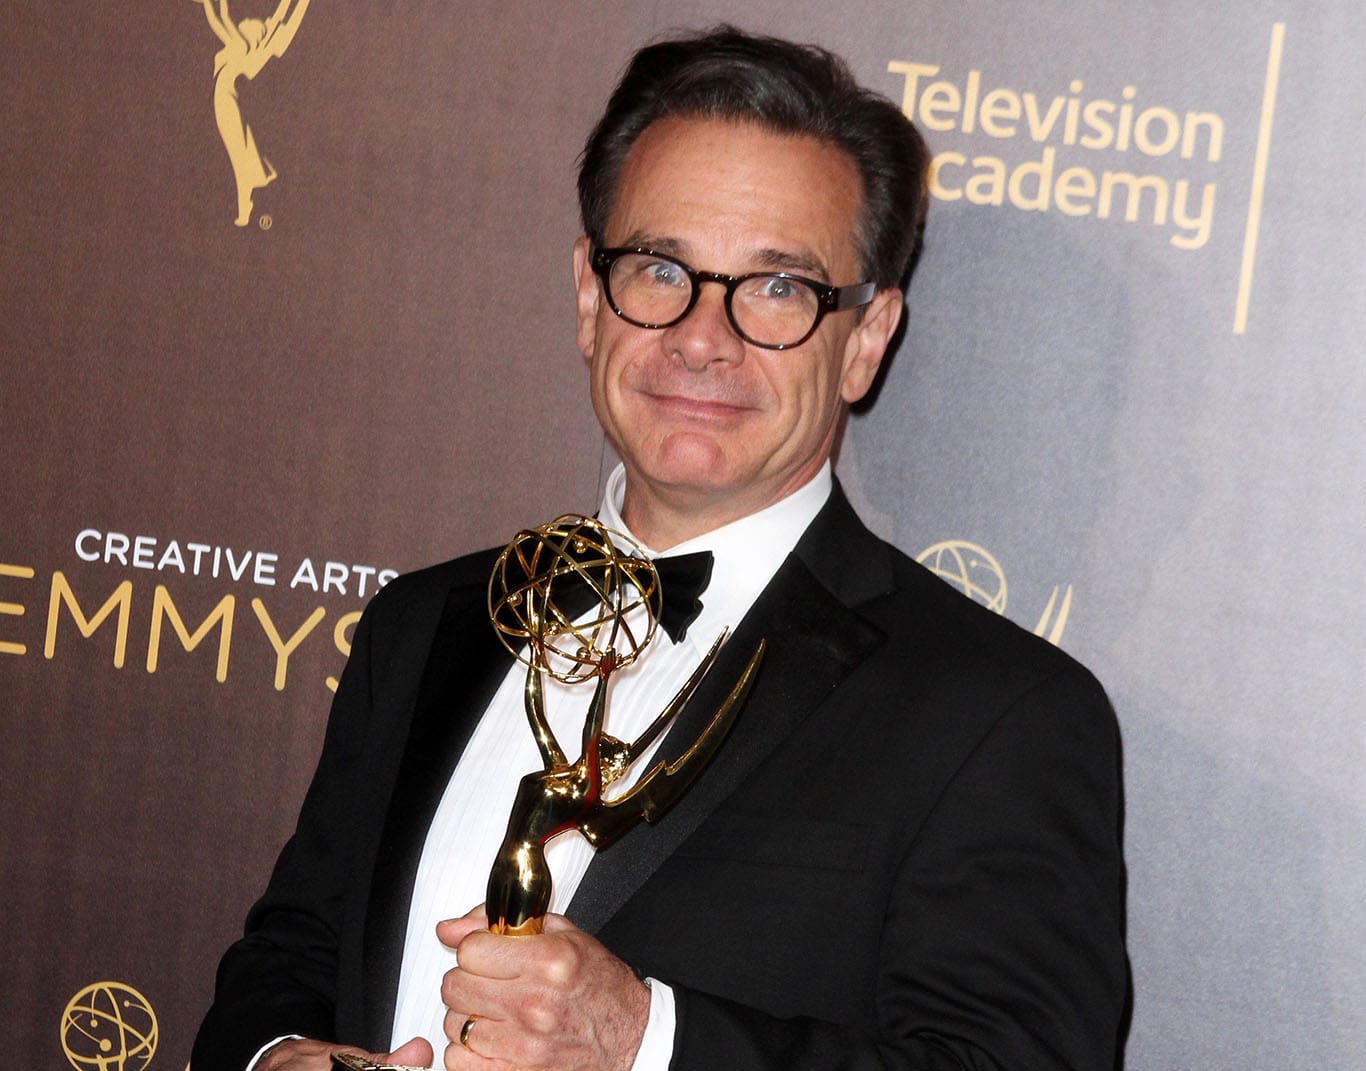 Creative Arts Emmy Awards 2016 Press Room - Day 1 held at the Microsoft Theatre Featuring: Peter Scolari Where: Los Angeles, California, United States When: 11 Sep 2016 Credit: Adriana M. Barraza/WENN.com